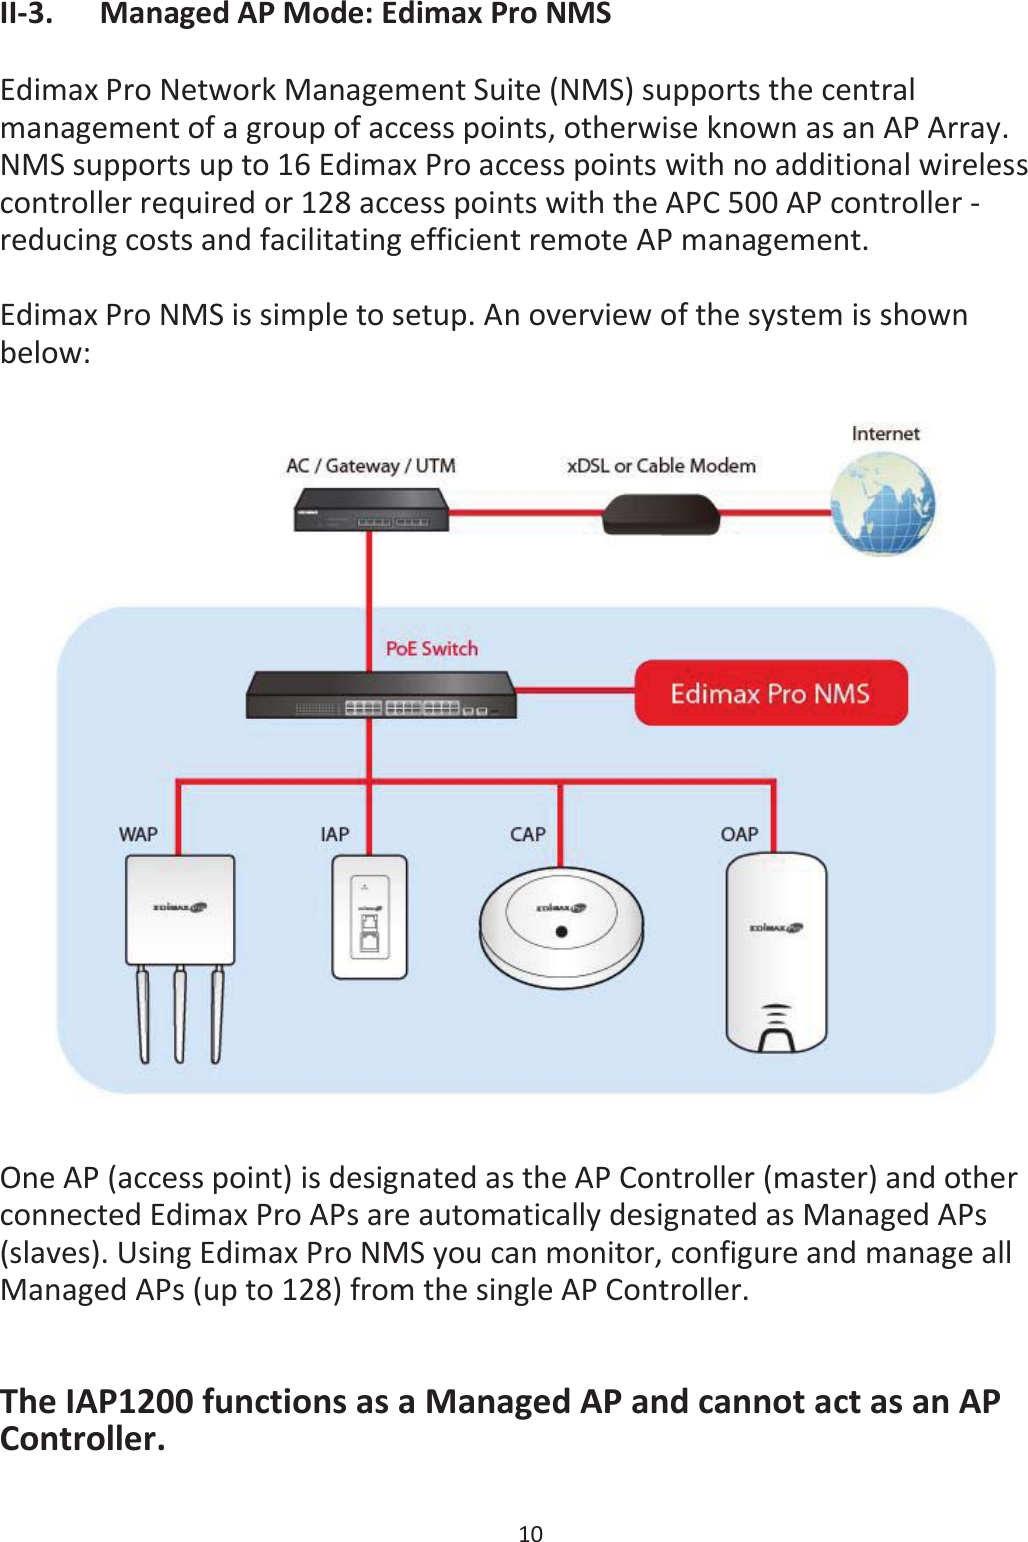 10  II-3.  Managed AP Mode: Edimax Pro NMS  Edimax Pro Network Management Suite (NMS) supports the central management of a group of access points, otherwise known as an AP Array. NMS supports up to 16 Edimax Pro access points with no additional wireless controller required or 128 access points with the APC 500 AP controller - reducing costs and facilitating efficient remote AP management.  Edimax Pro NMS is simple to setup. An overview of the system is shown below:  One AP (access point) is designated as the AP Controller (master) and other connected Edimax Pro APs are automatically designated as Managed APs (slaves). Using Edimax Pro NMS you can monitor, configure and manage all Managed APs (up to 128) from the single AP Controller.   The IAP1200 functions as a Managed AP and cannot act as an AP Controller.  